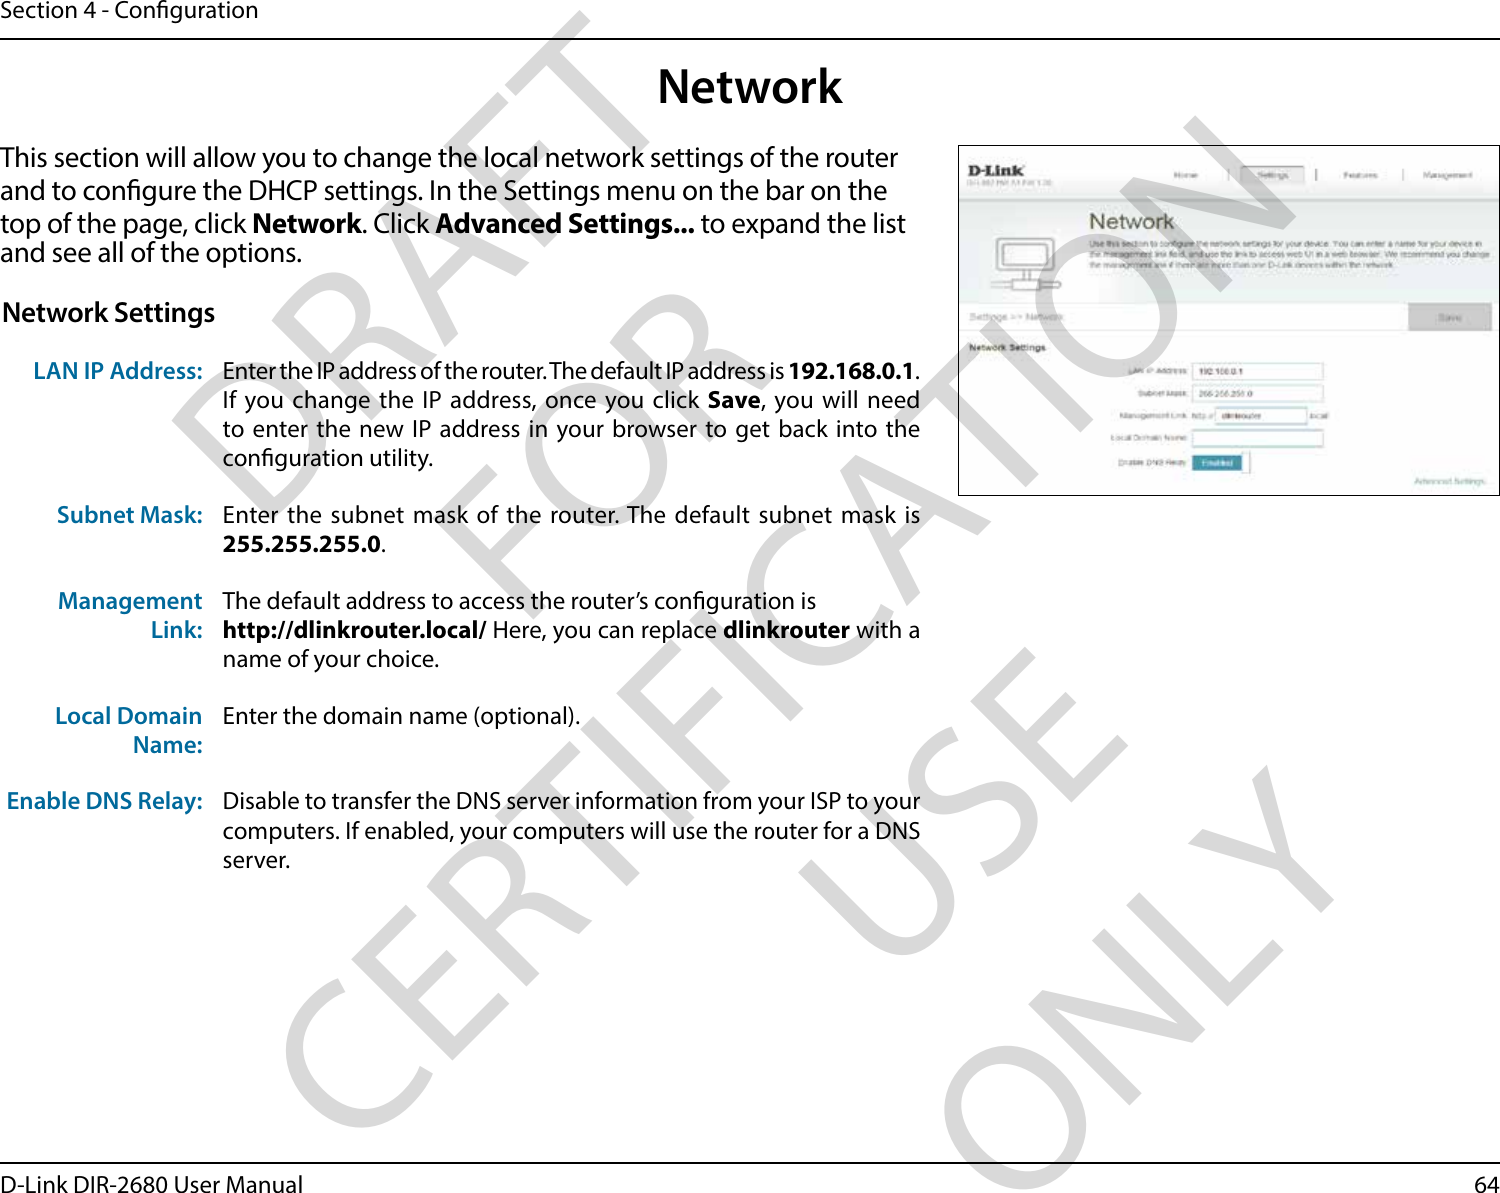 64D-Link DIR-2680 User ManualSection 4 - CongurationNetworkThis section will allow you to change the local network settings of the router and to congure the DHCP settings. In the Settings menu on the bar on the top of the page, click Network. Click Advanced Settings... to expand the list and see all of the options. Network SettingsLAN IP Address: Enter the IP address of the router. The default IP address is 192.168.0.1.If you change the IP address, once you click Save, you will need to enter the new IP address in your browser to get back into the conguration utility.Subnet Mask: Enter the subnet mask of the router. The default subnet mask is 255.255.255.0.Management Link:The default address to access the router’s conguration is http://dlinkrouter.local/ Here, you can replace dlinkrouter with a name of your choice.Local Domain Name:Enter the domain name (optional).Enable DNS Relay: Disable to transfer the DNS server information from your ISP to your computers. If enabled, your computers will use the router for a DNS server.DRAFT FOR CERTIFICATION USE ONLY